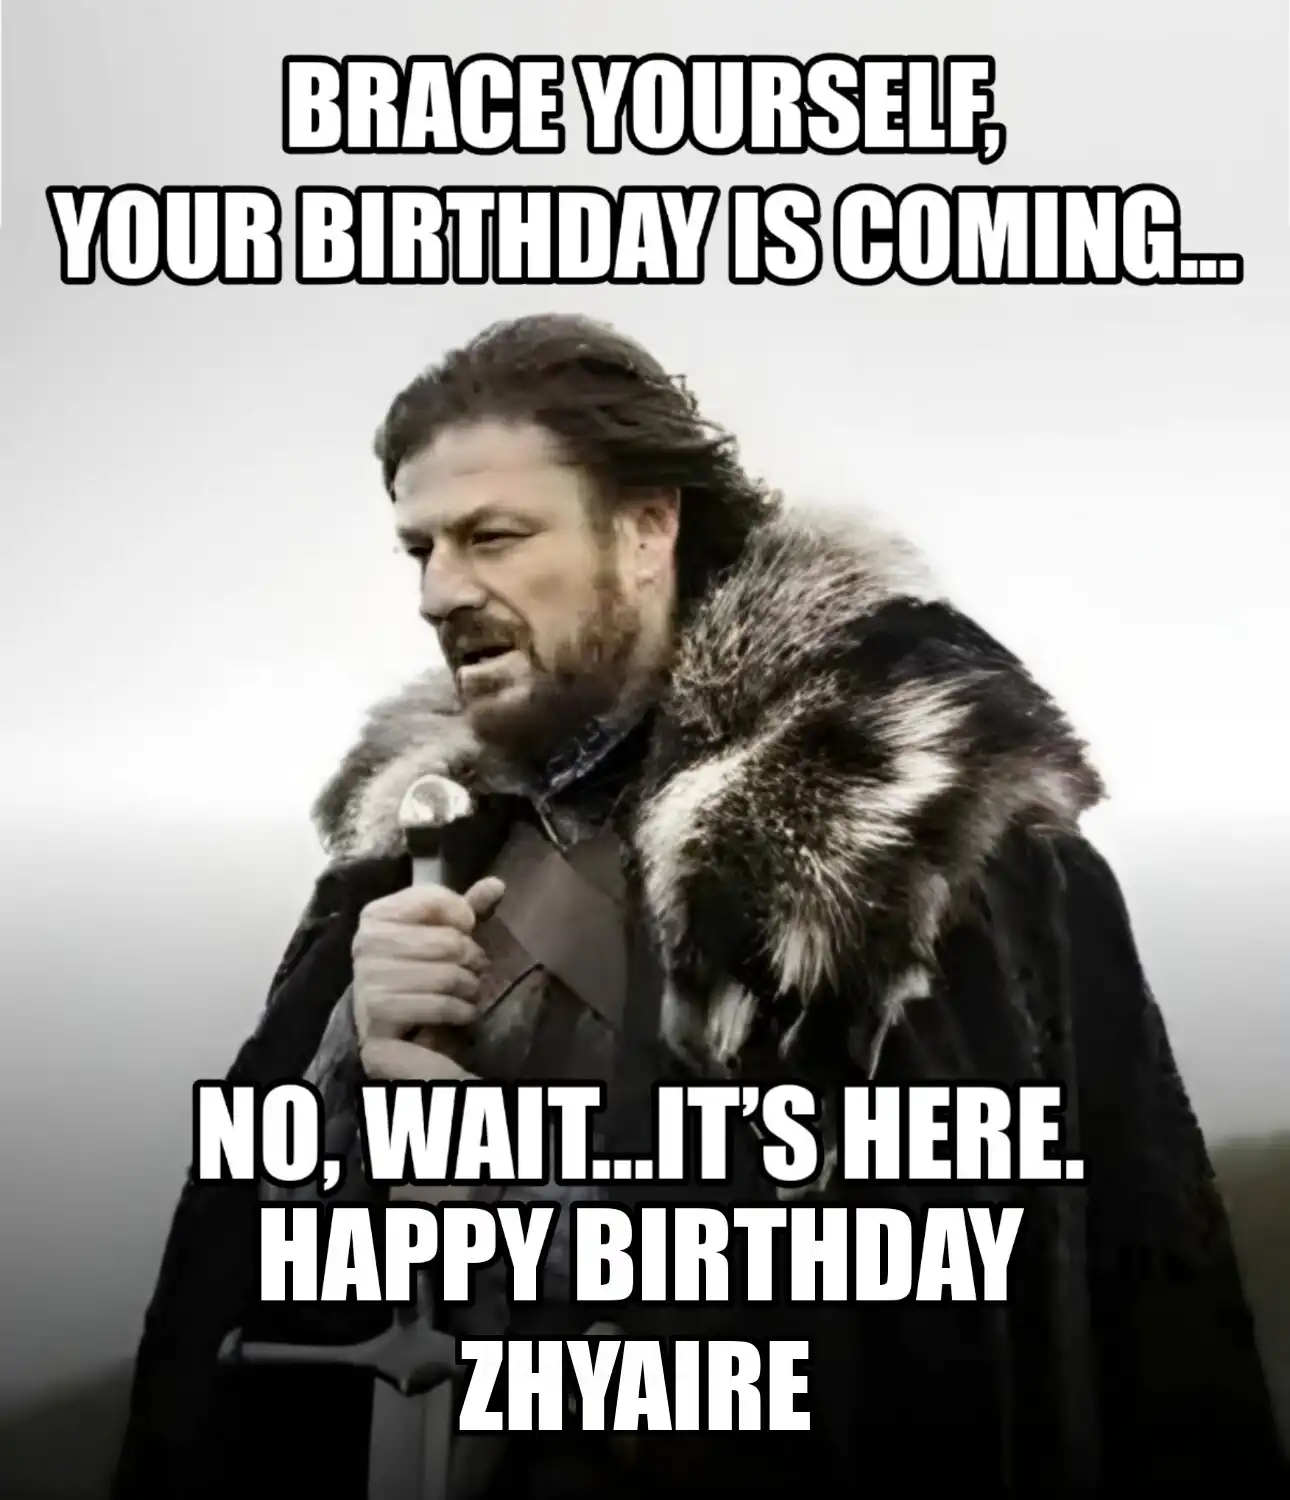 Happy Birthday Zhyaire Brace Yourself Your Birthday Is Coming Meme